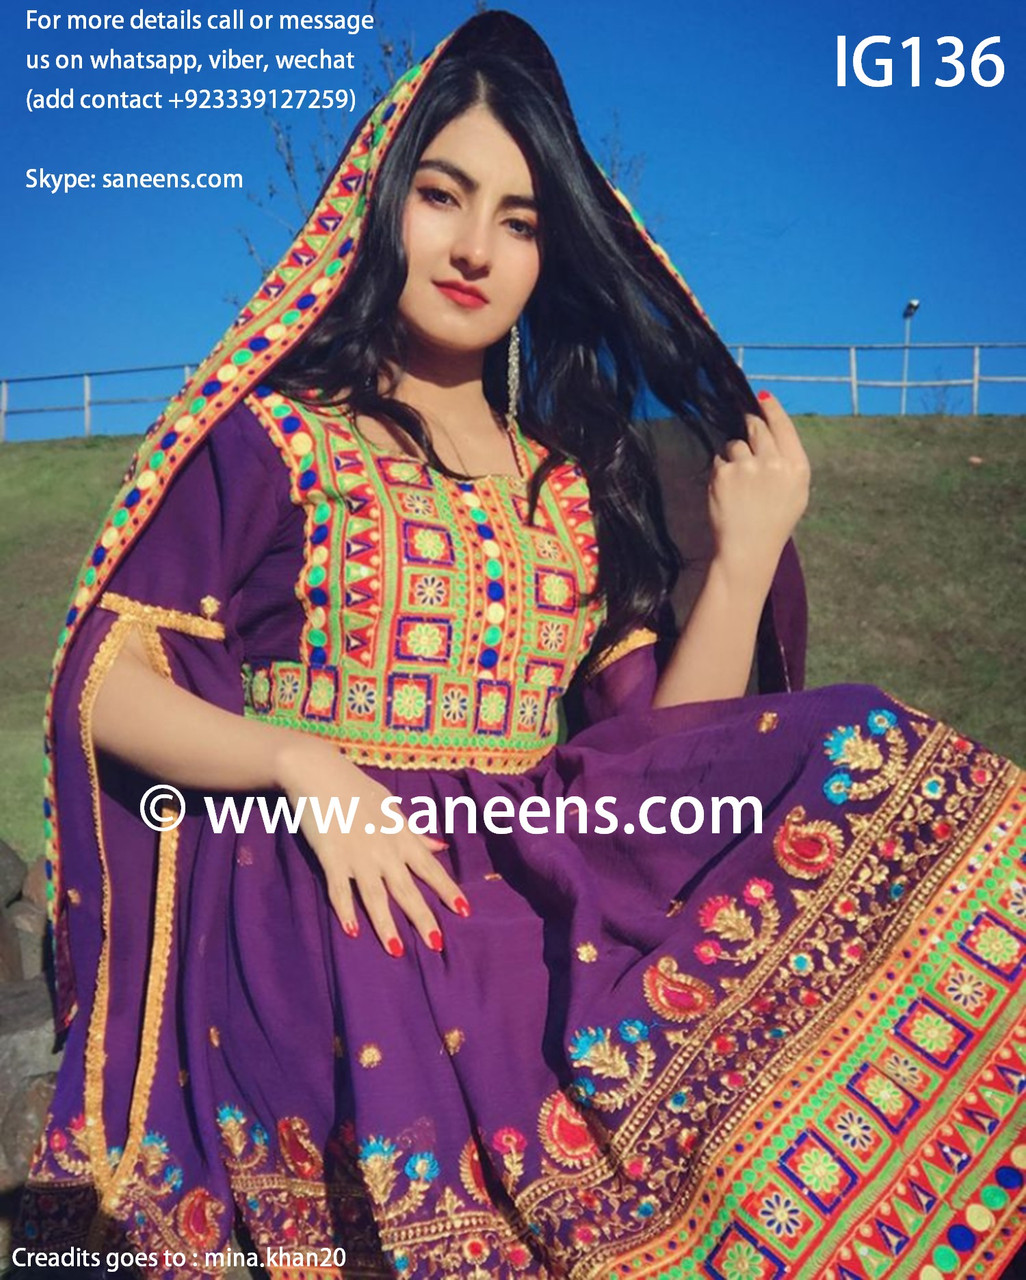 New afghan fashion kuchi style embroidery work simple dress in purple ...